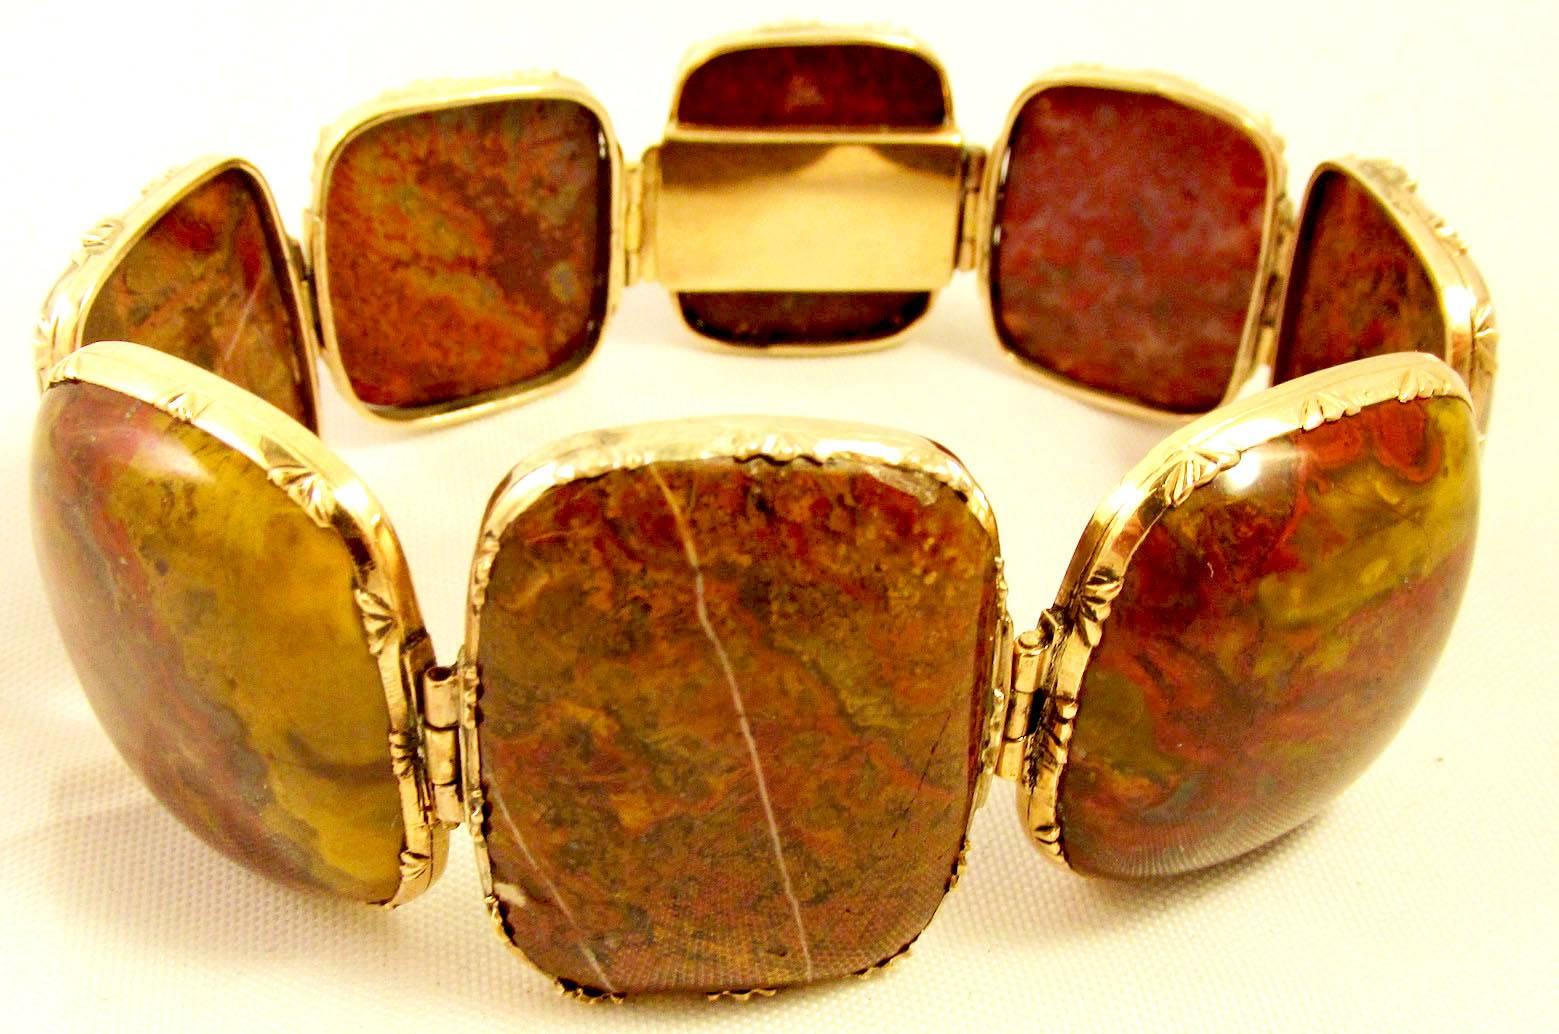 Lovely Georgian carnelian bracelet of graduated stones set in 12K gold. The stones have a variety colors and patterns. Wonderful to wear in the Autumn or anytime of the year. The bracelet measures 7" long and dates to c. 1820.